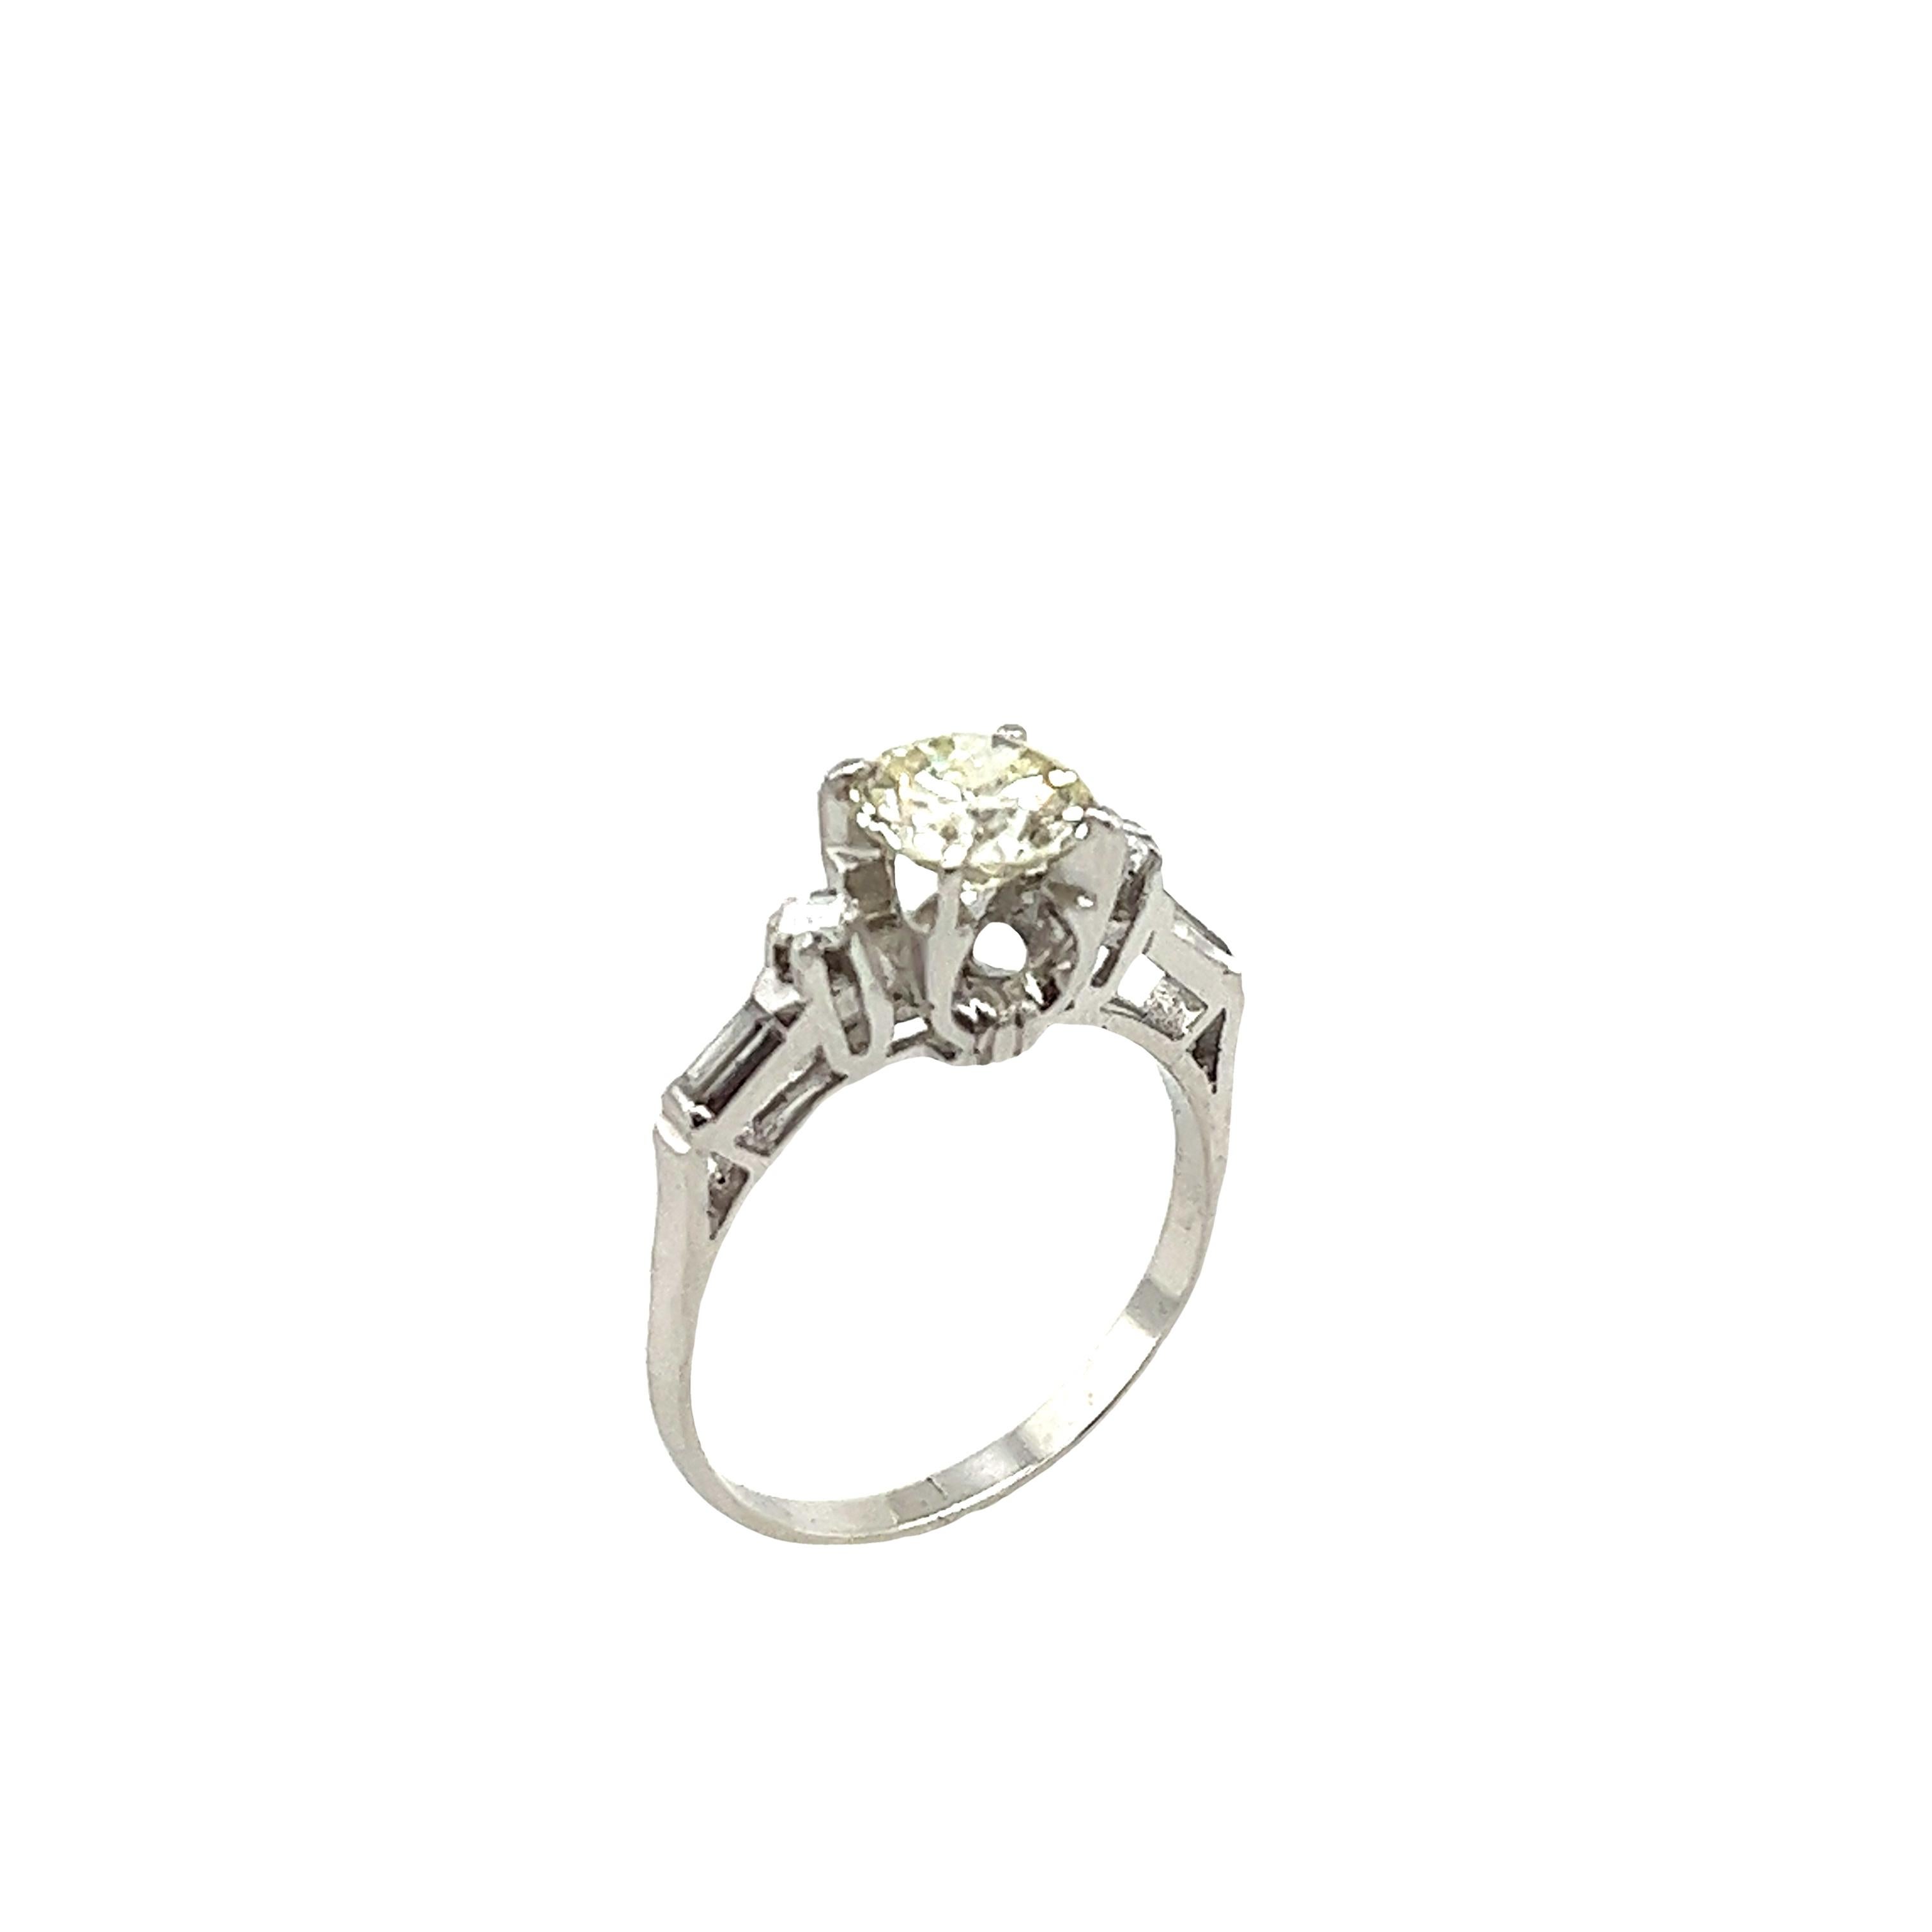 Platinum Diamond Solitaire Ring Set With 1.09ct M/SI1 Round Cut Diamond In Excellent Condition For Sale In London, GB